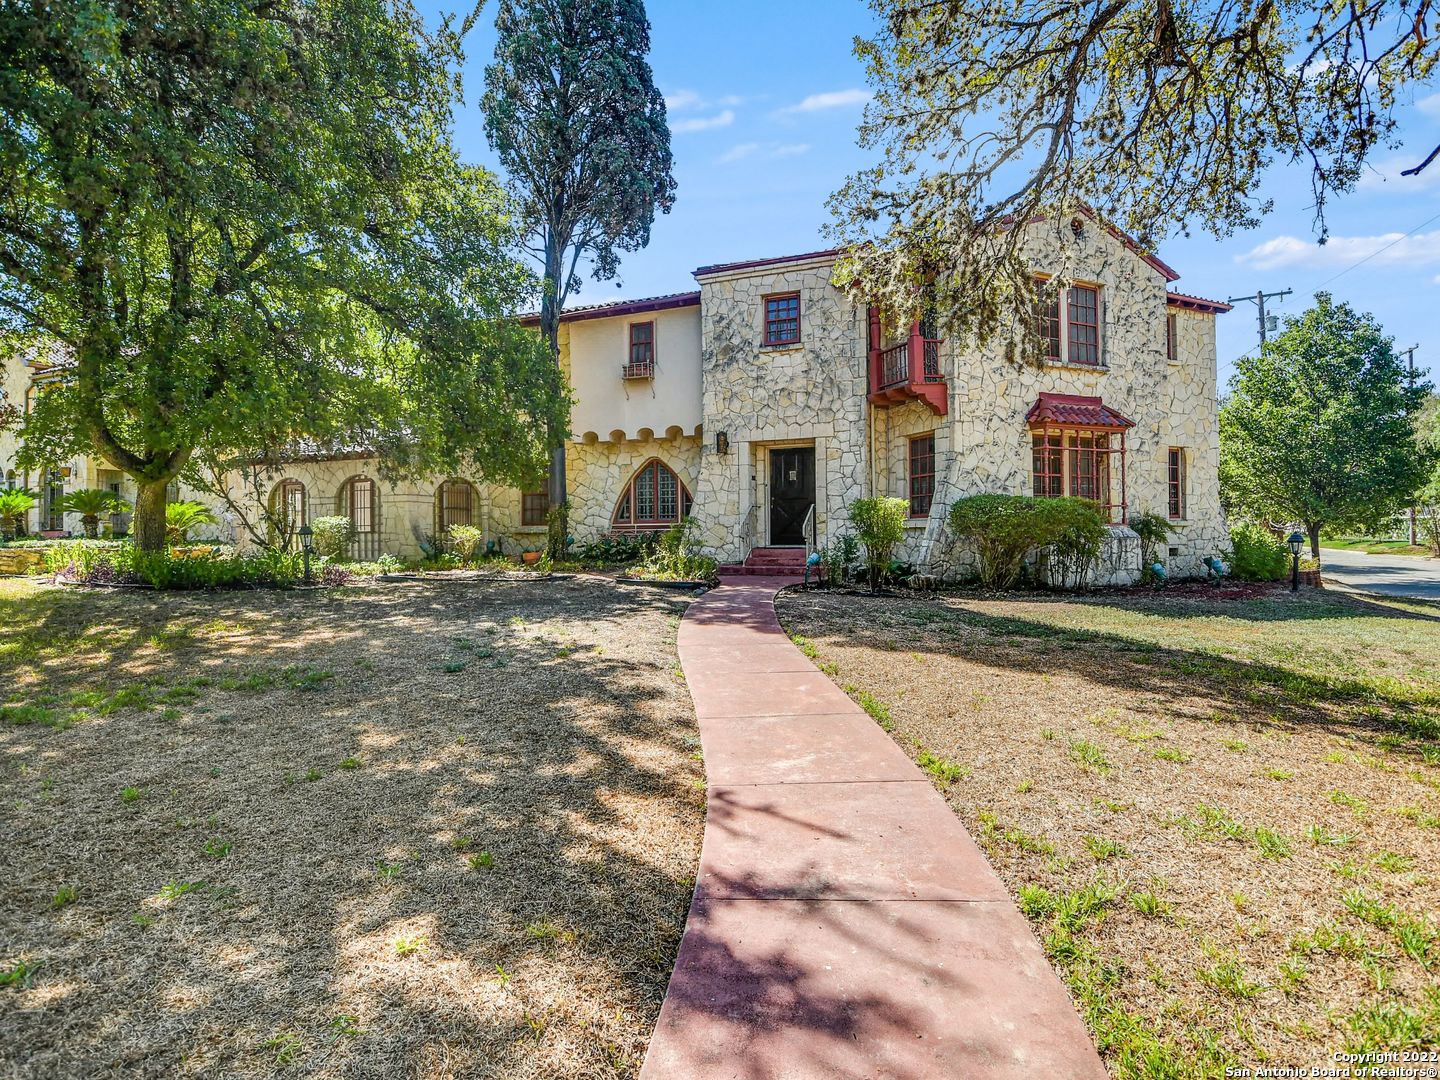 Located on the most coveted block on West Kings Highway in Monte Vista, this two level, stone exterior, 3234 square foot home is available for sale after 50+ years of ownership. This 1910-built home is solid as a rock structurally with unique architectural details. The original wood floors are throughout the house. First level features a formal living, dining and study space, a sun room and additional family room overlooking the patio and backyard. Kitchen is prime for a renovation. Up the beautiful spiral stairs with stained-glass window to the second level is your primary suite, two, large secondary bedrooms and a full bath. There is an attached two-car garage. The 0.375 acre corner lot could allow for a home expansion and / or a pool / casita addition.  The home has been well maintained.  Enjoy as-is or have a blank canvas to design your dream space.  Being sold as-is with inspection report available.